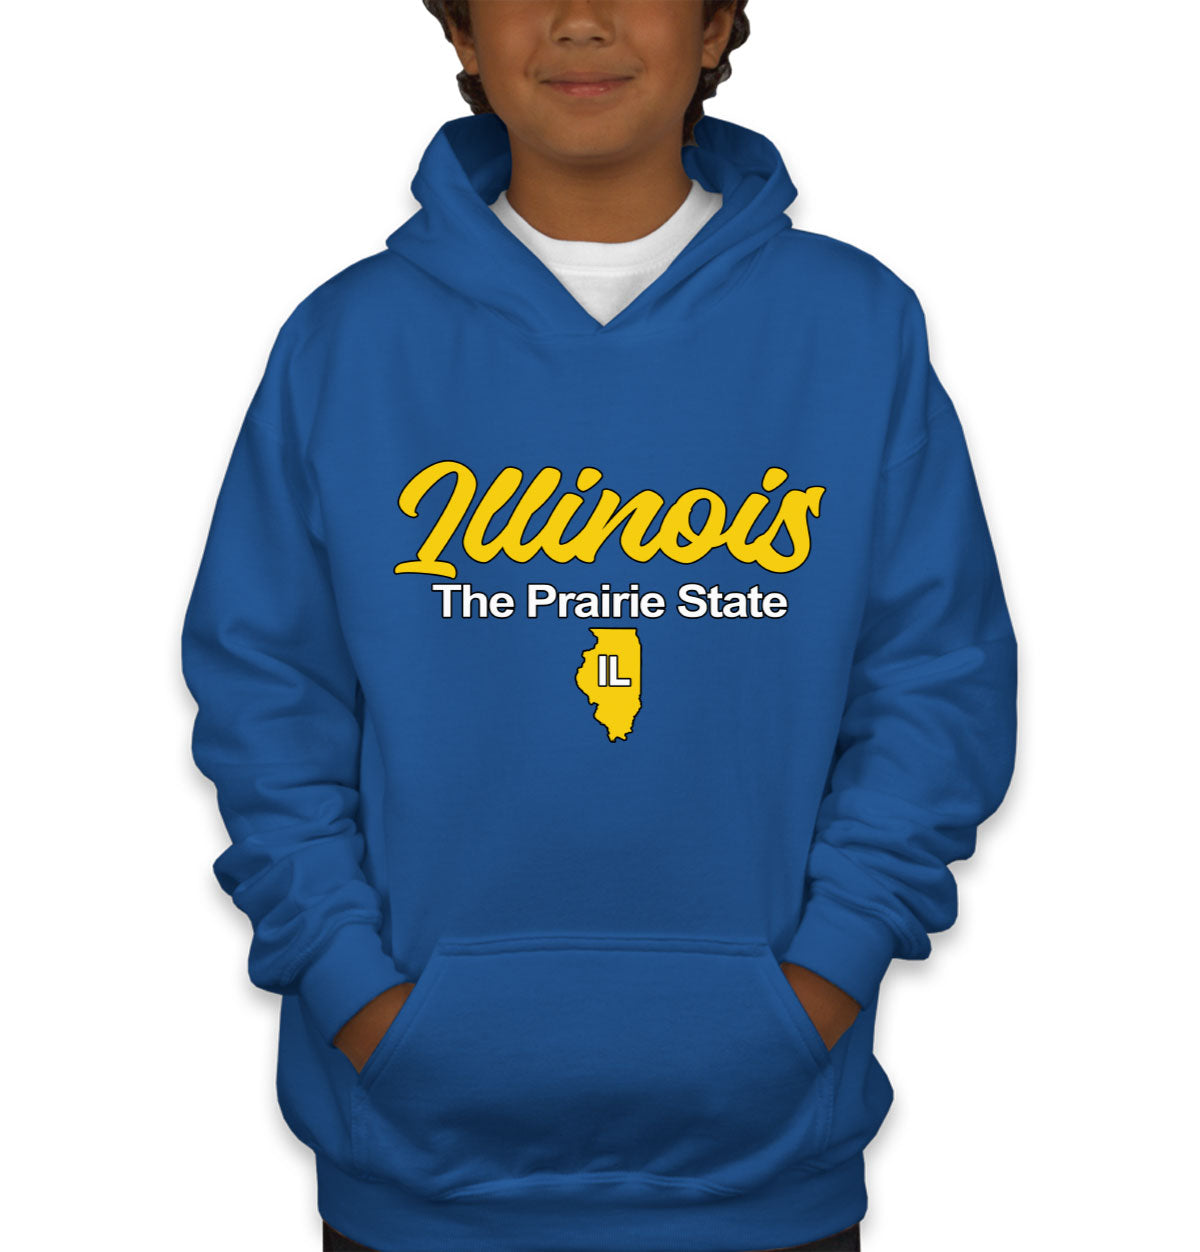 Illinois The Prairie State Youth Hoodie